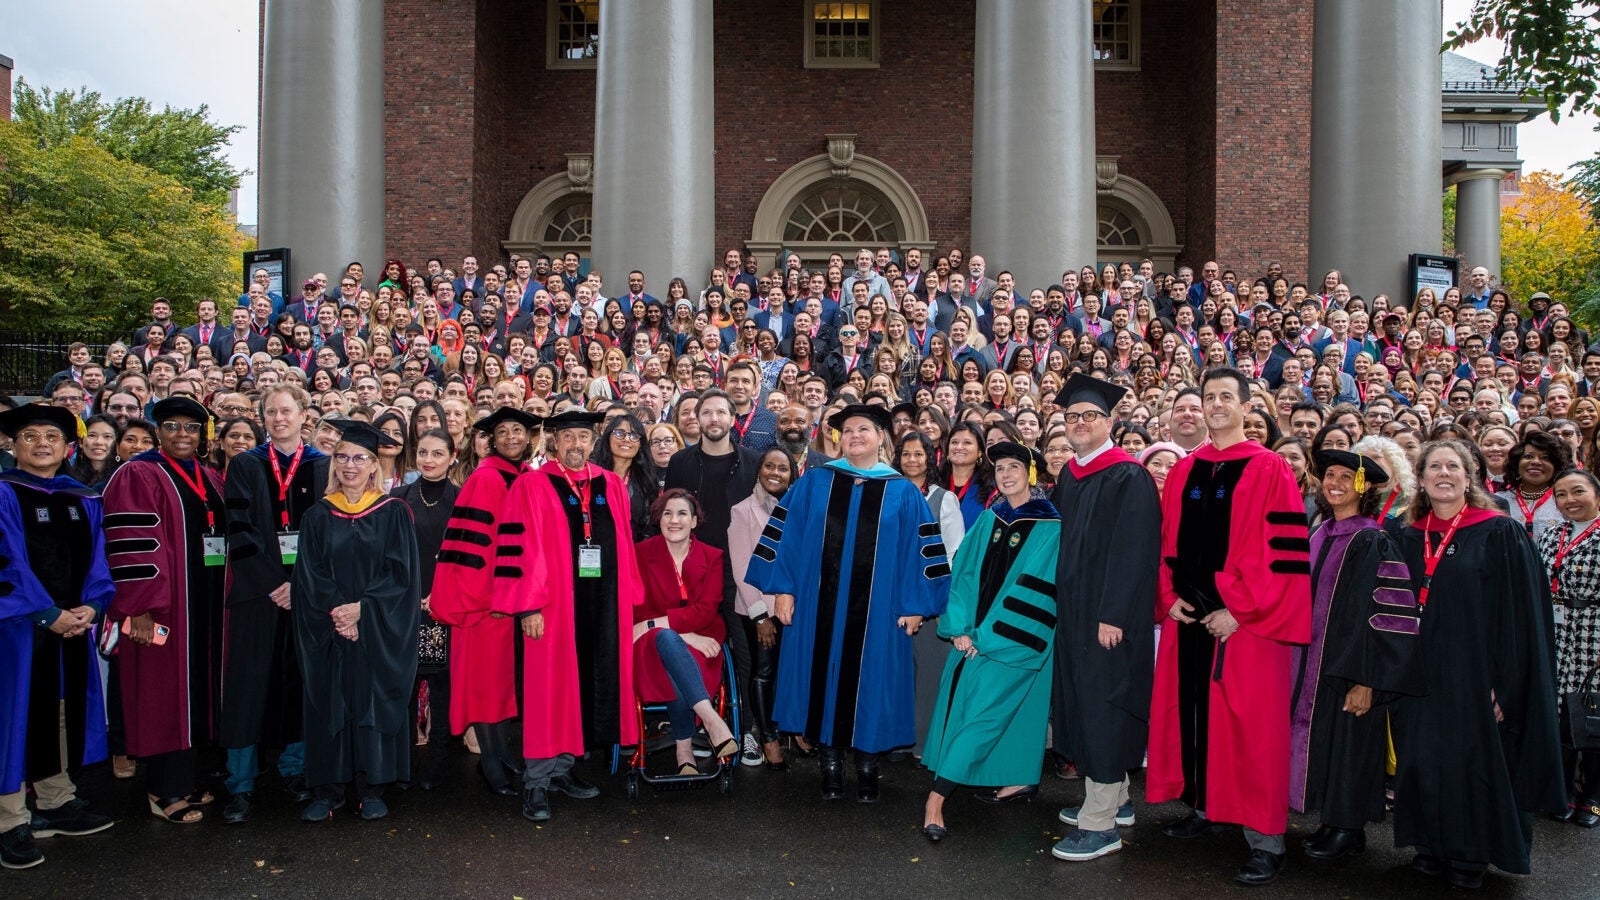 Harvard Extension School students and Deans pose for a group photo outside of Memorial Church before their convocation ceremony.